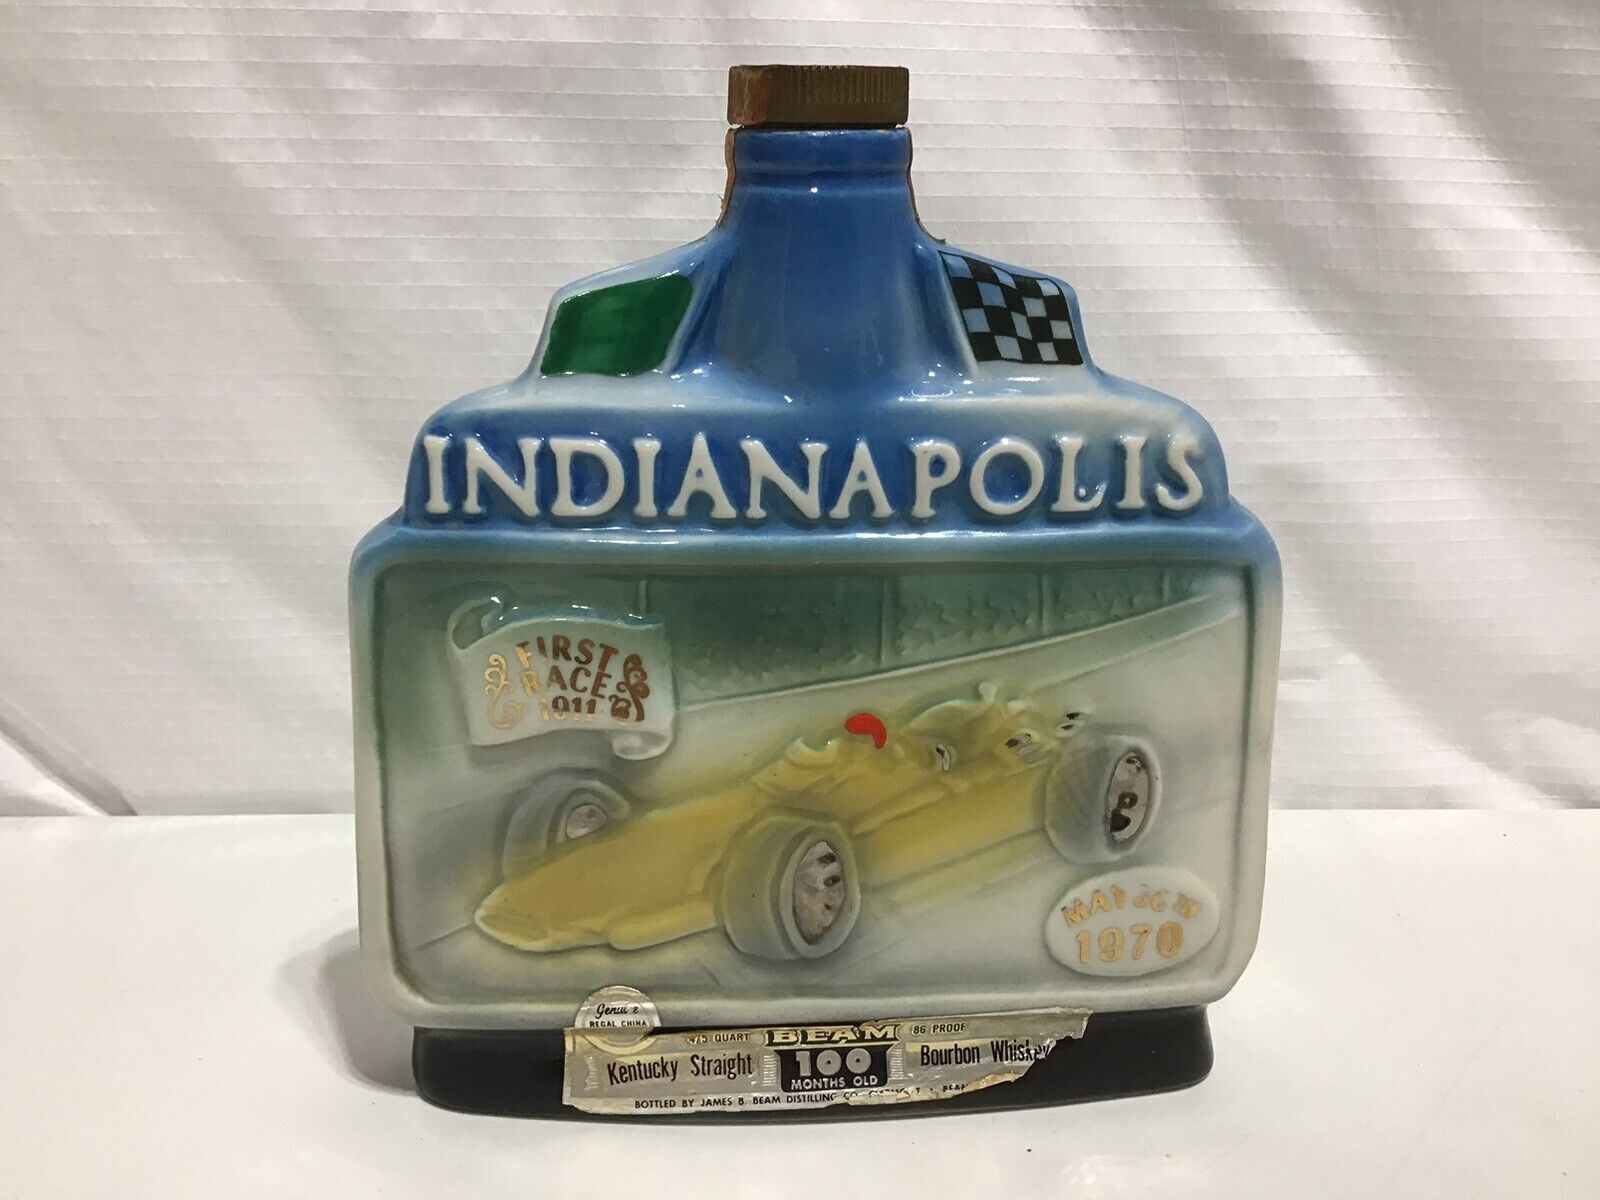 1970 Jim Beam Indianapolis Motor Speedway 54th Indy 500 Race Decanter Bottle